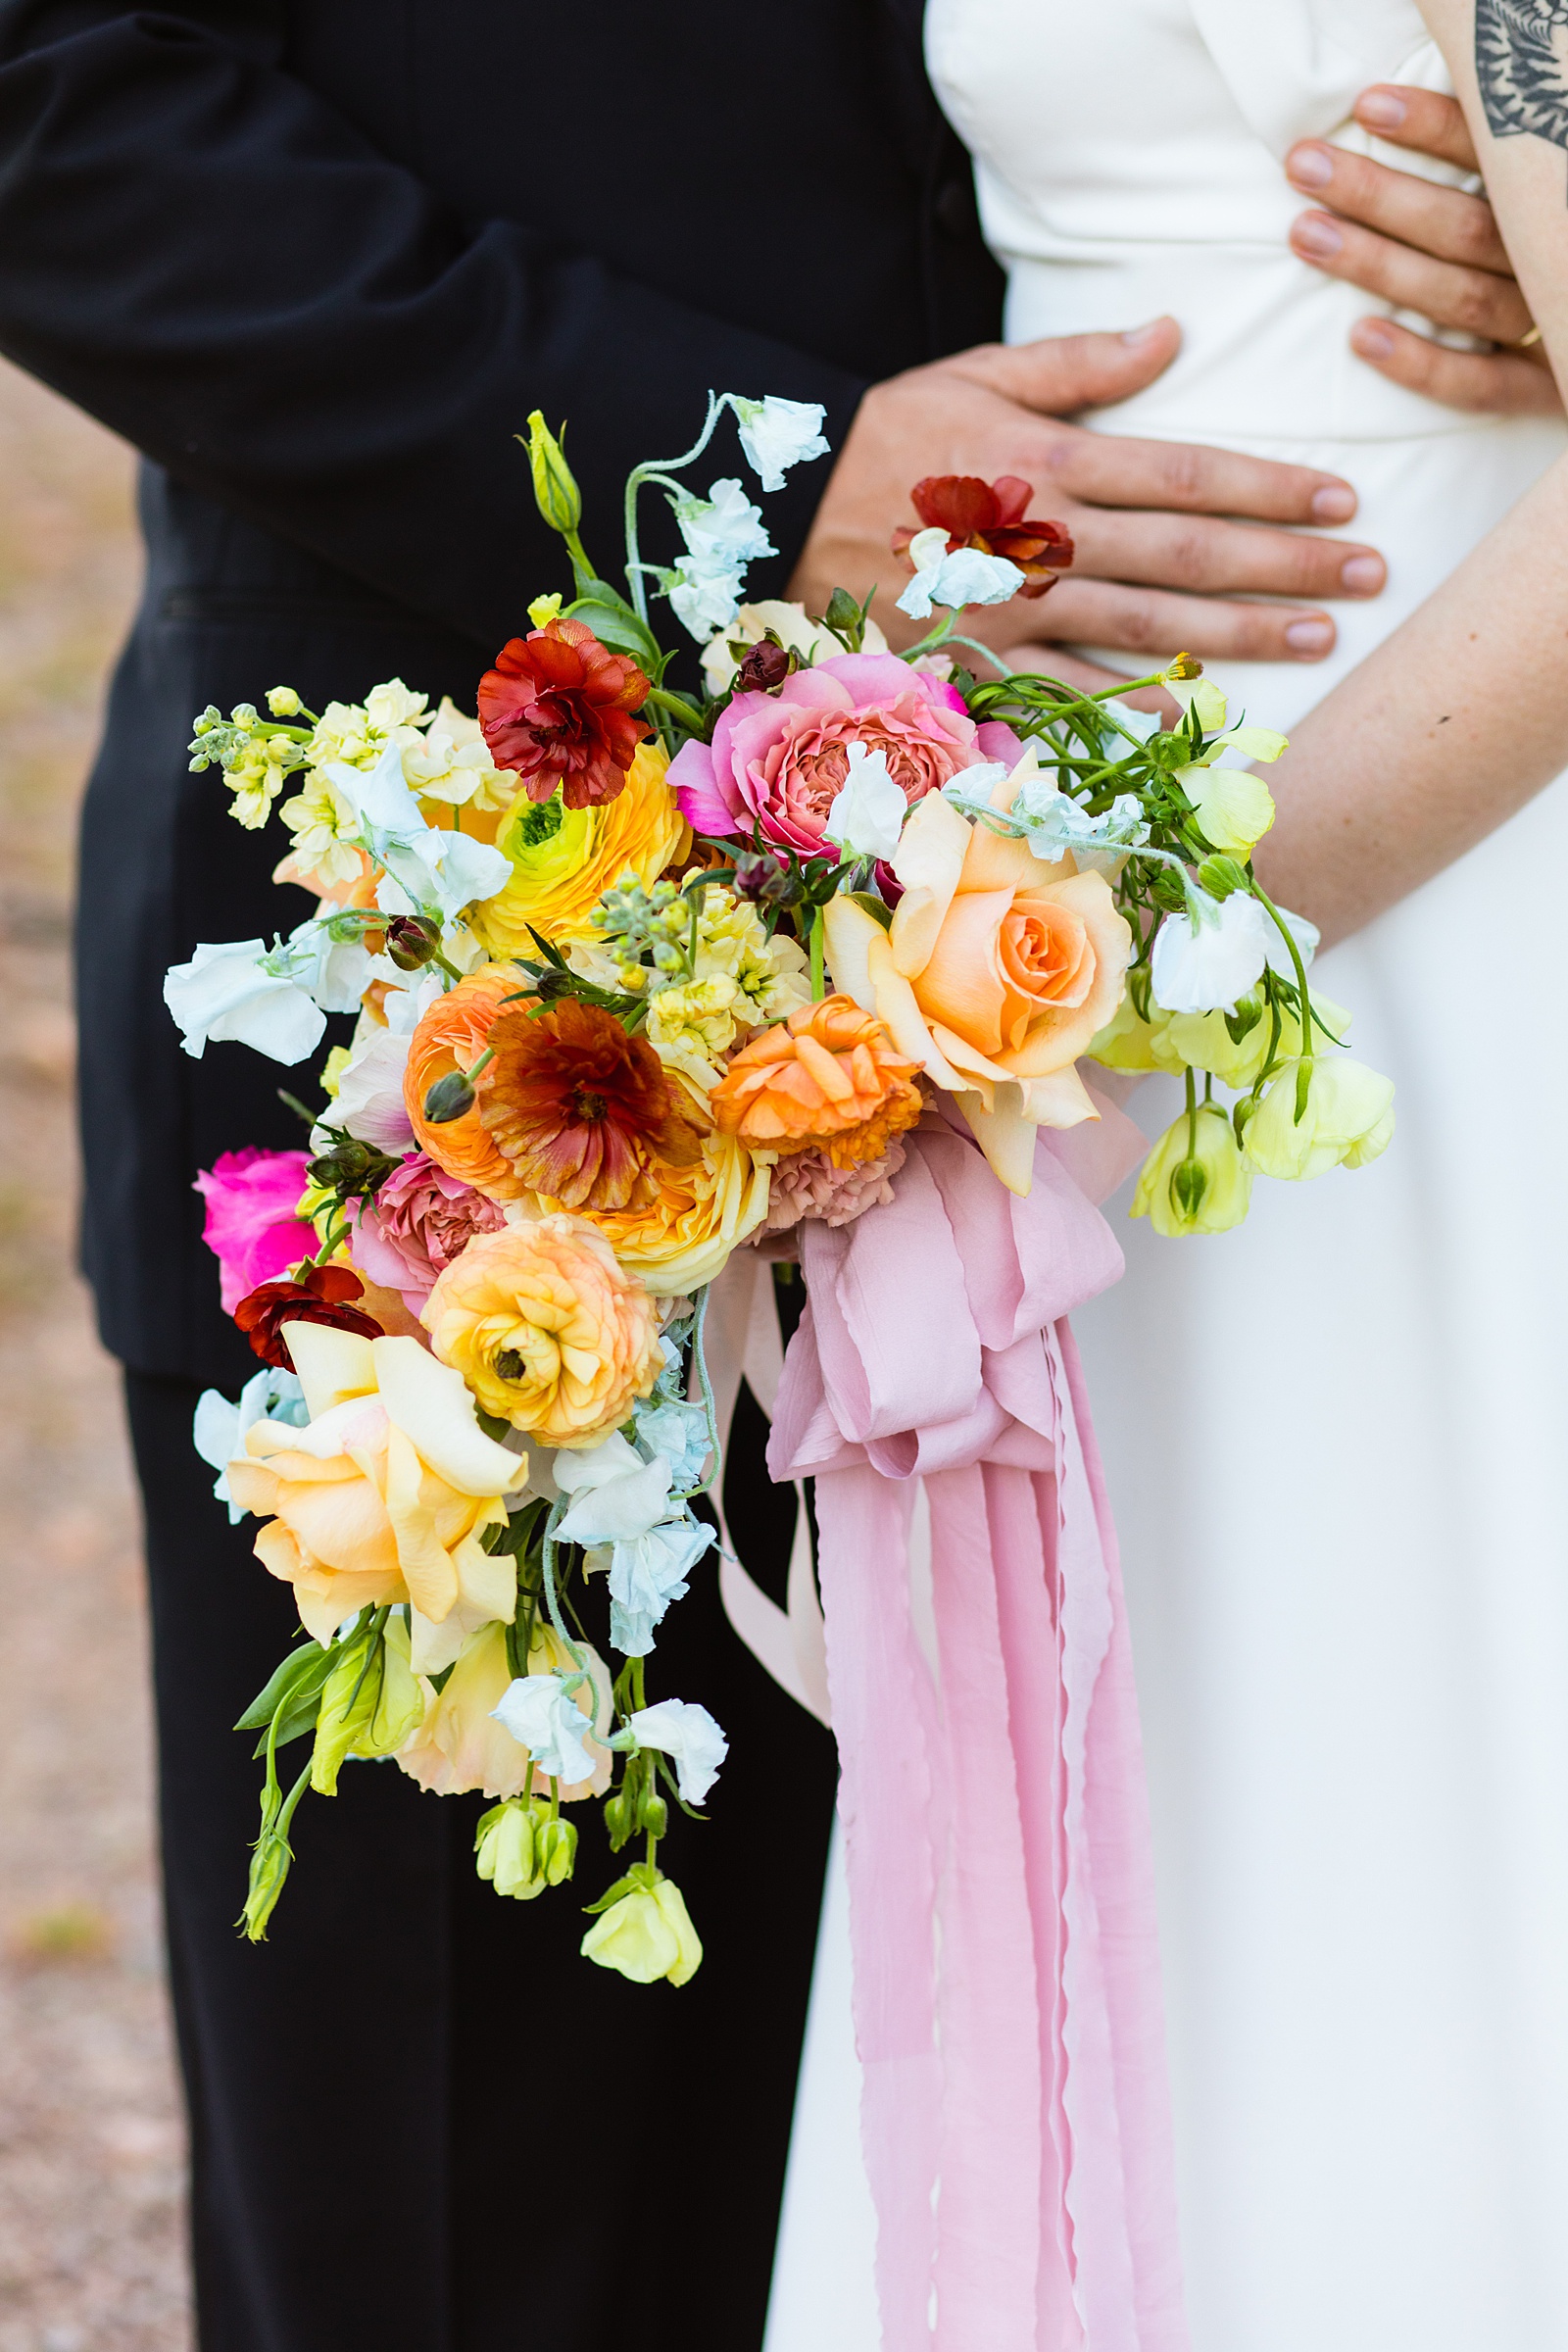 Detail image of bouquet by PMA Photography.